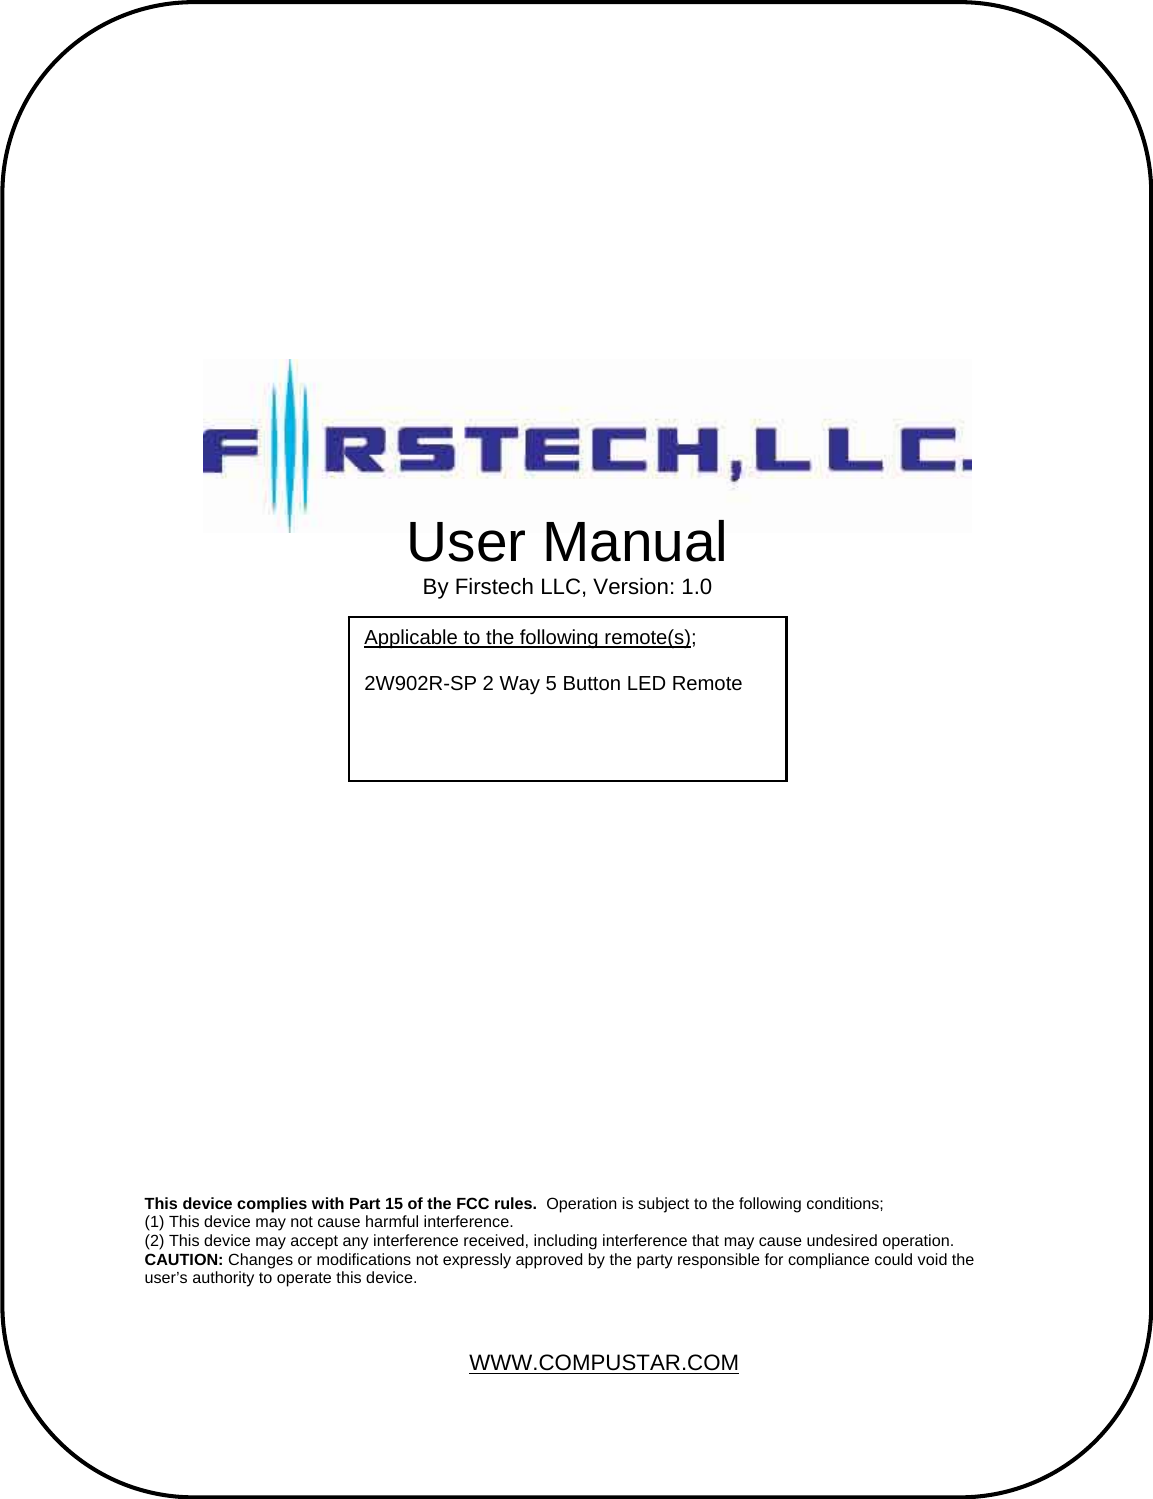                                                       User Manual By Firstech LLC, Version: 1.0 Applicable to the following remote(s);  2W902R-SP 2 Way 5 Button LED Remote    This device complies with Part 15 of the FCC rules.  Operation is subject to the following conditions; (1) This device may not cause harmful interference. (2) This device may accept any interference received, including interference that may cause undesired operation. CAUTION: Changes or modifications not expressly approved by the party responsible for compliance could void the user’s authority to operate this device. WWW.COMPUSTAR.COM 